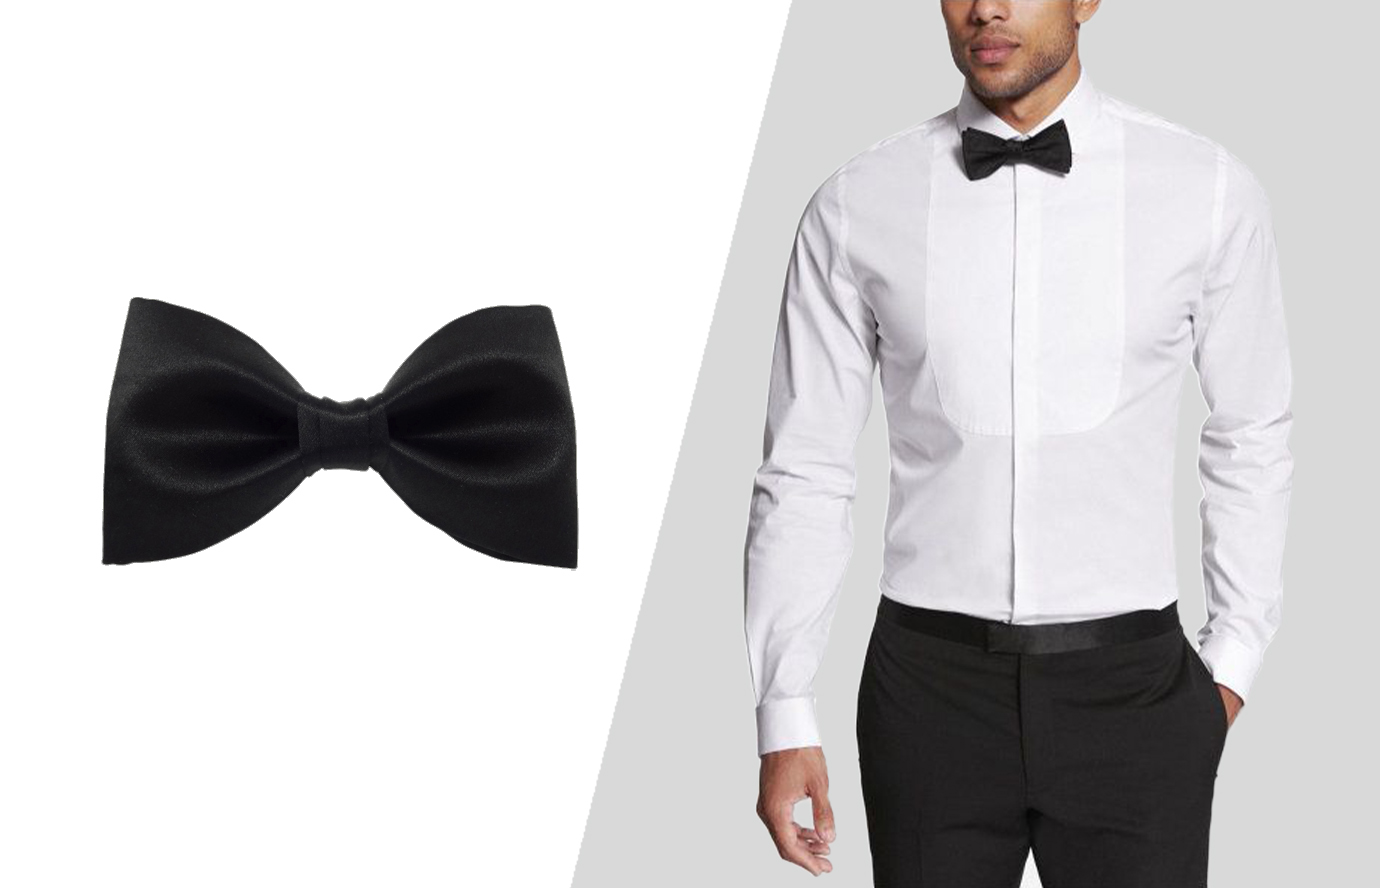 Men's Bow Ties Guide – Styles and Shapes By Amedeo Exclusive